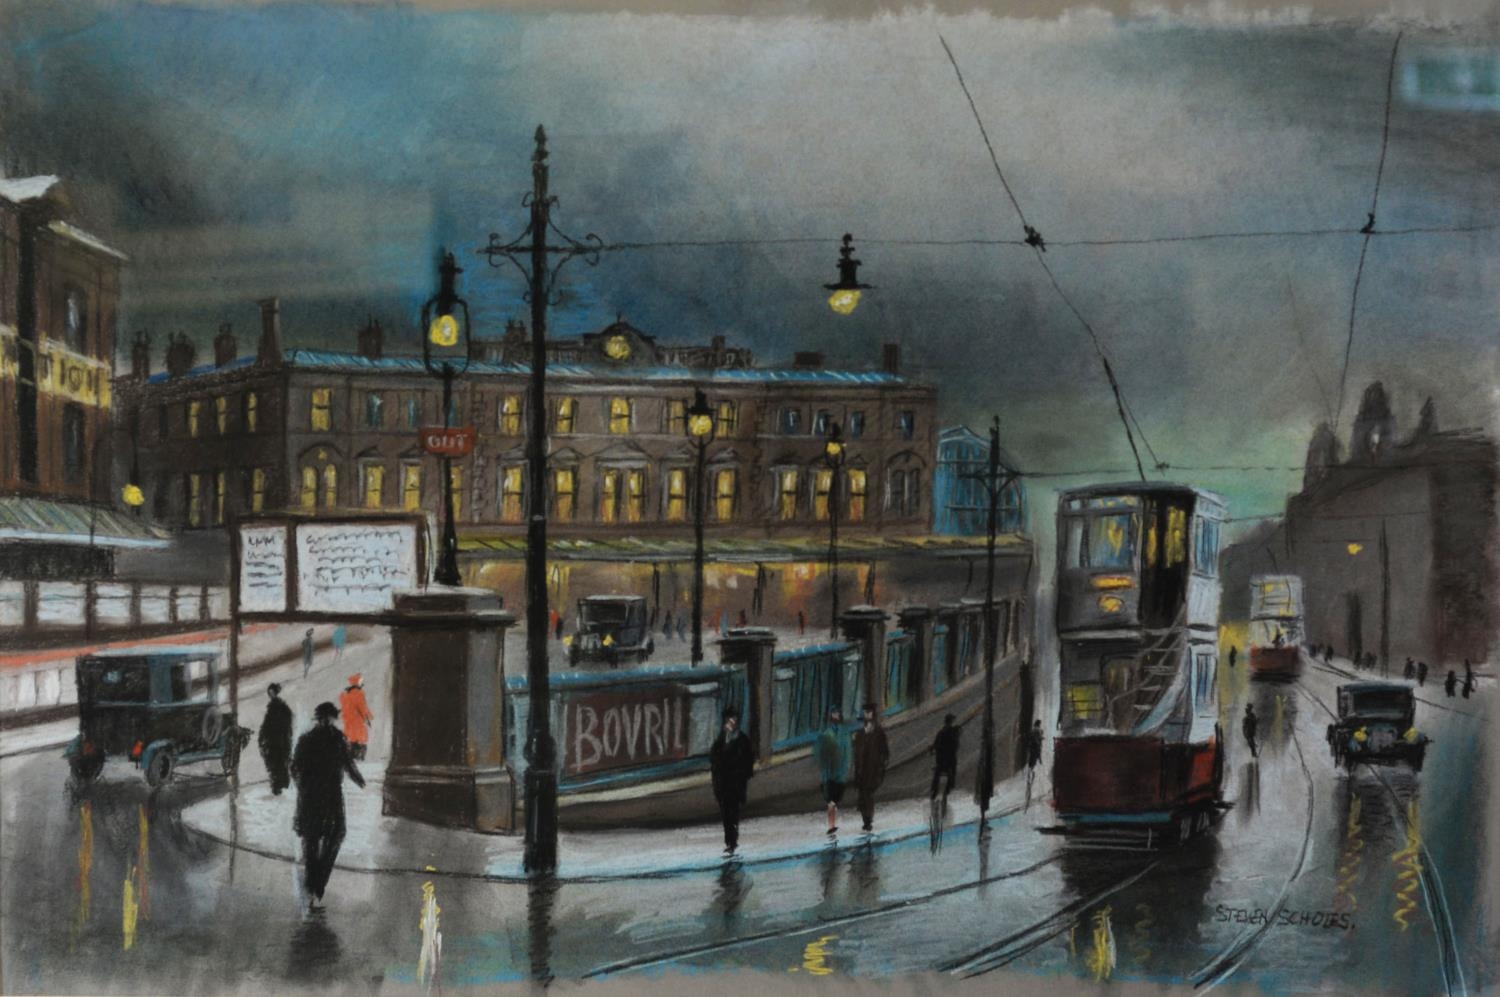 STEVEN SCHOLES (b.1952) PASTEL London Road, Manchester Signed, titled to label verso 19” x 28 ¾” (